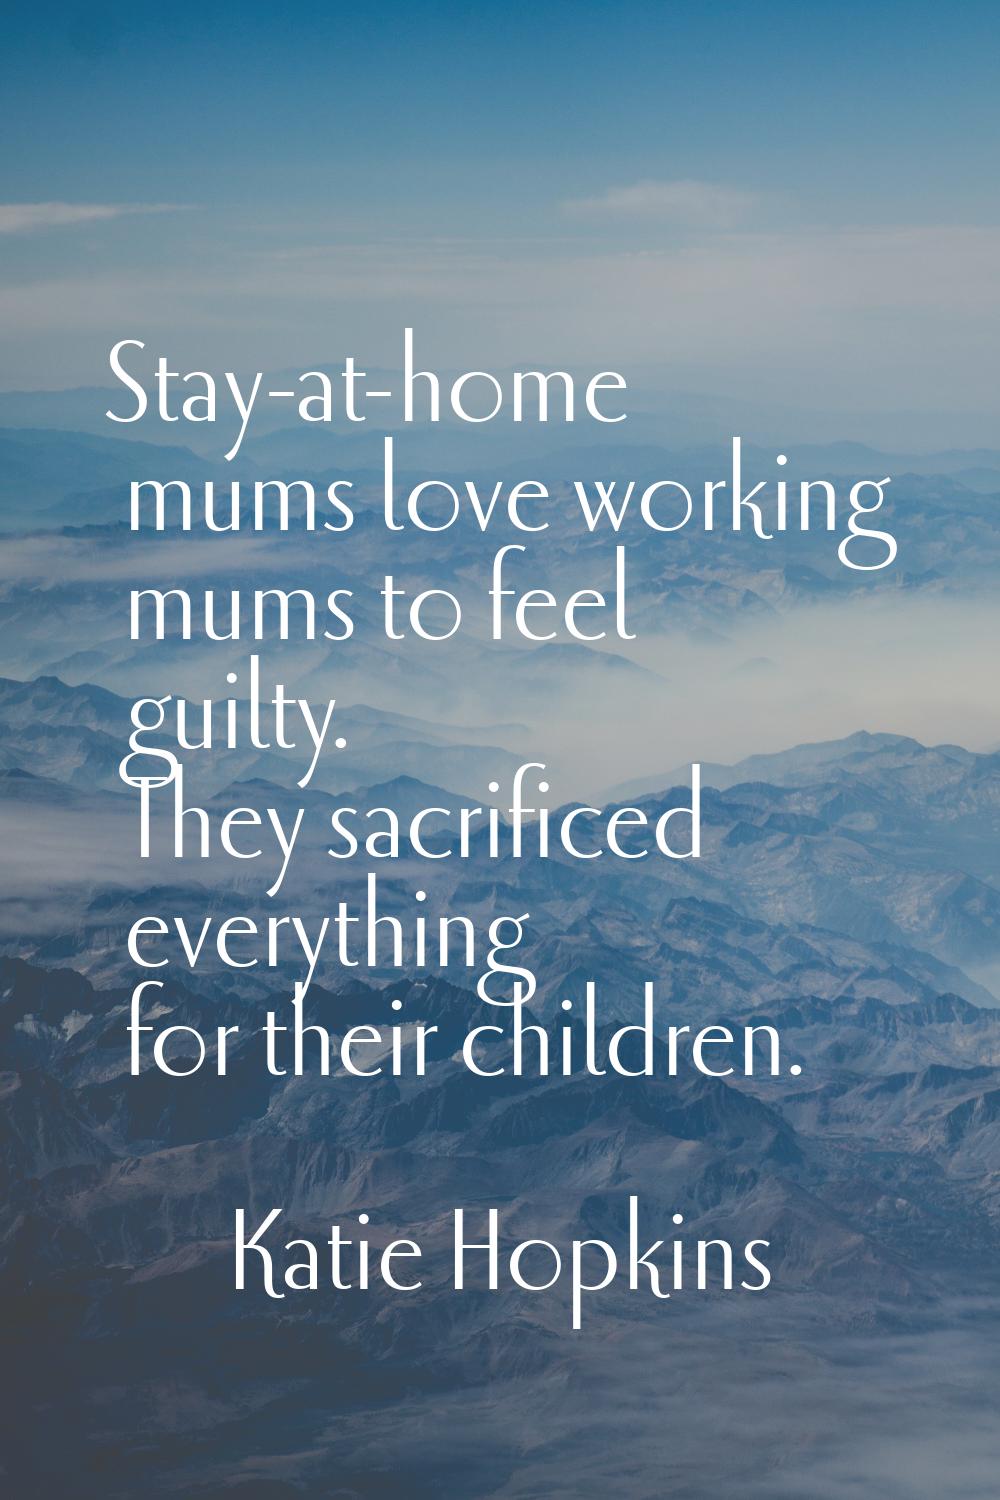 Stay-at-home mums love working mums to feel guilty. They sacrificed everything for their children.